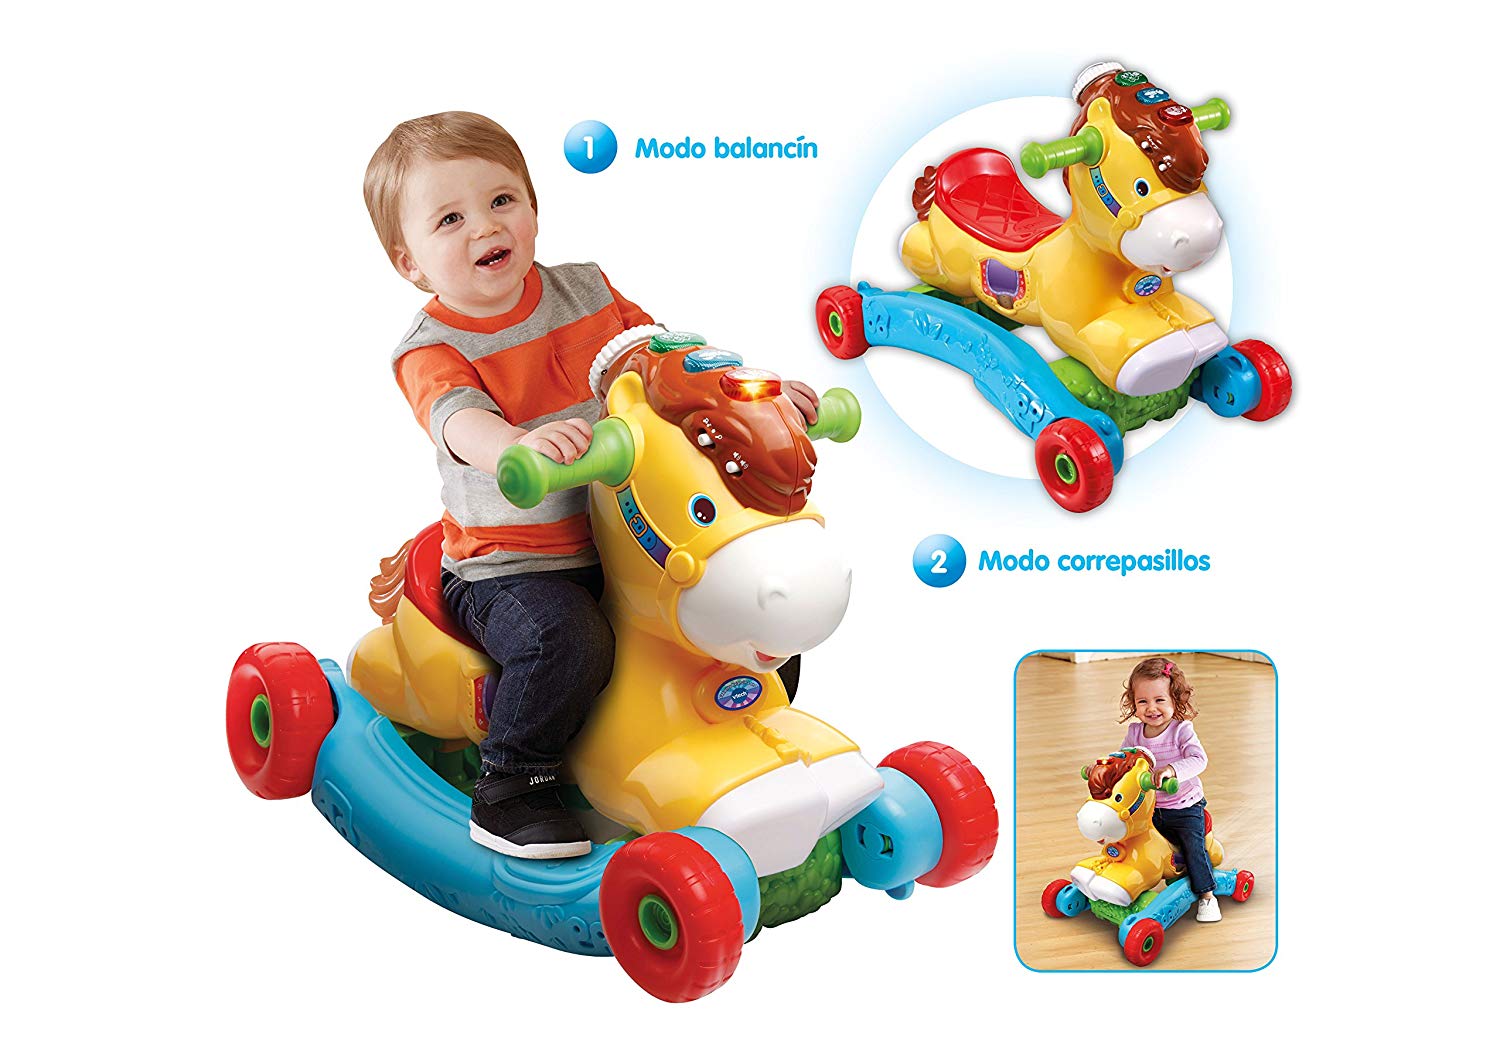 VTech 2 in 1 Rocking Horse Rider Set Includes Two Play Modes (80-191422 ...